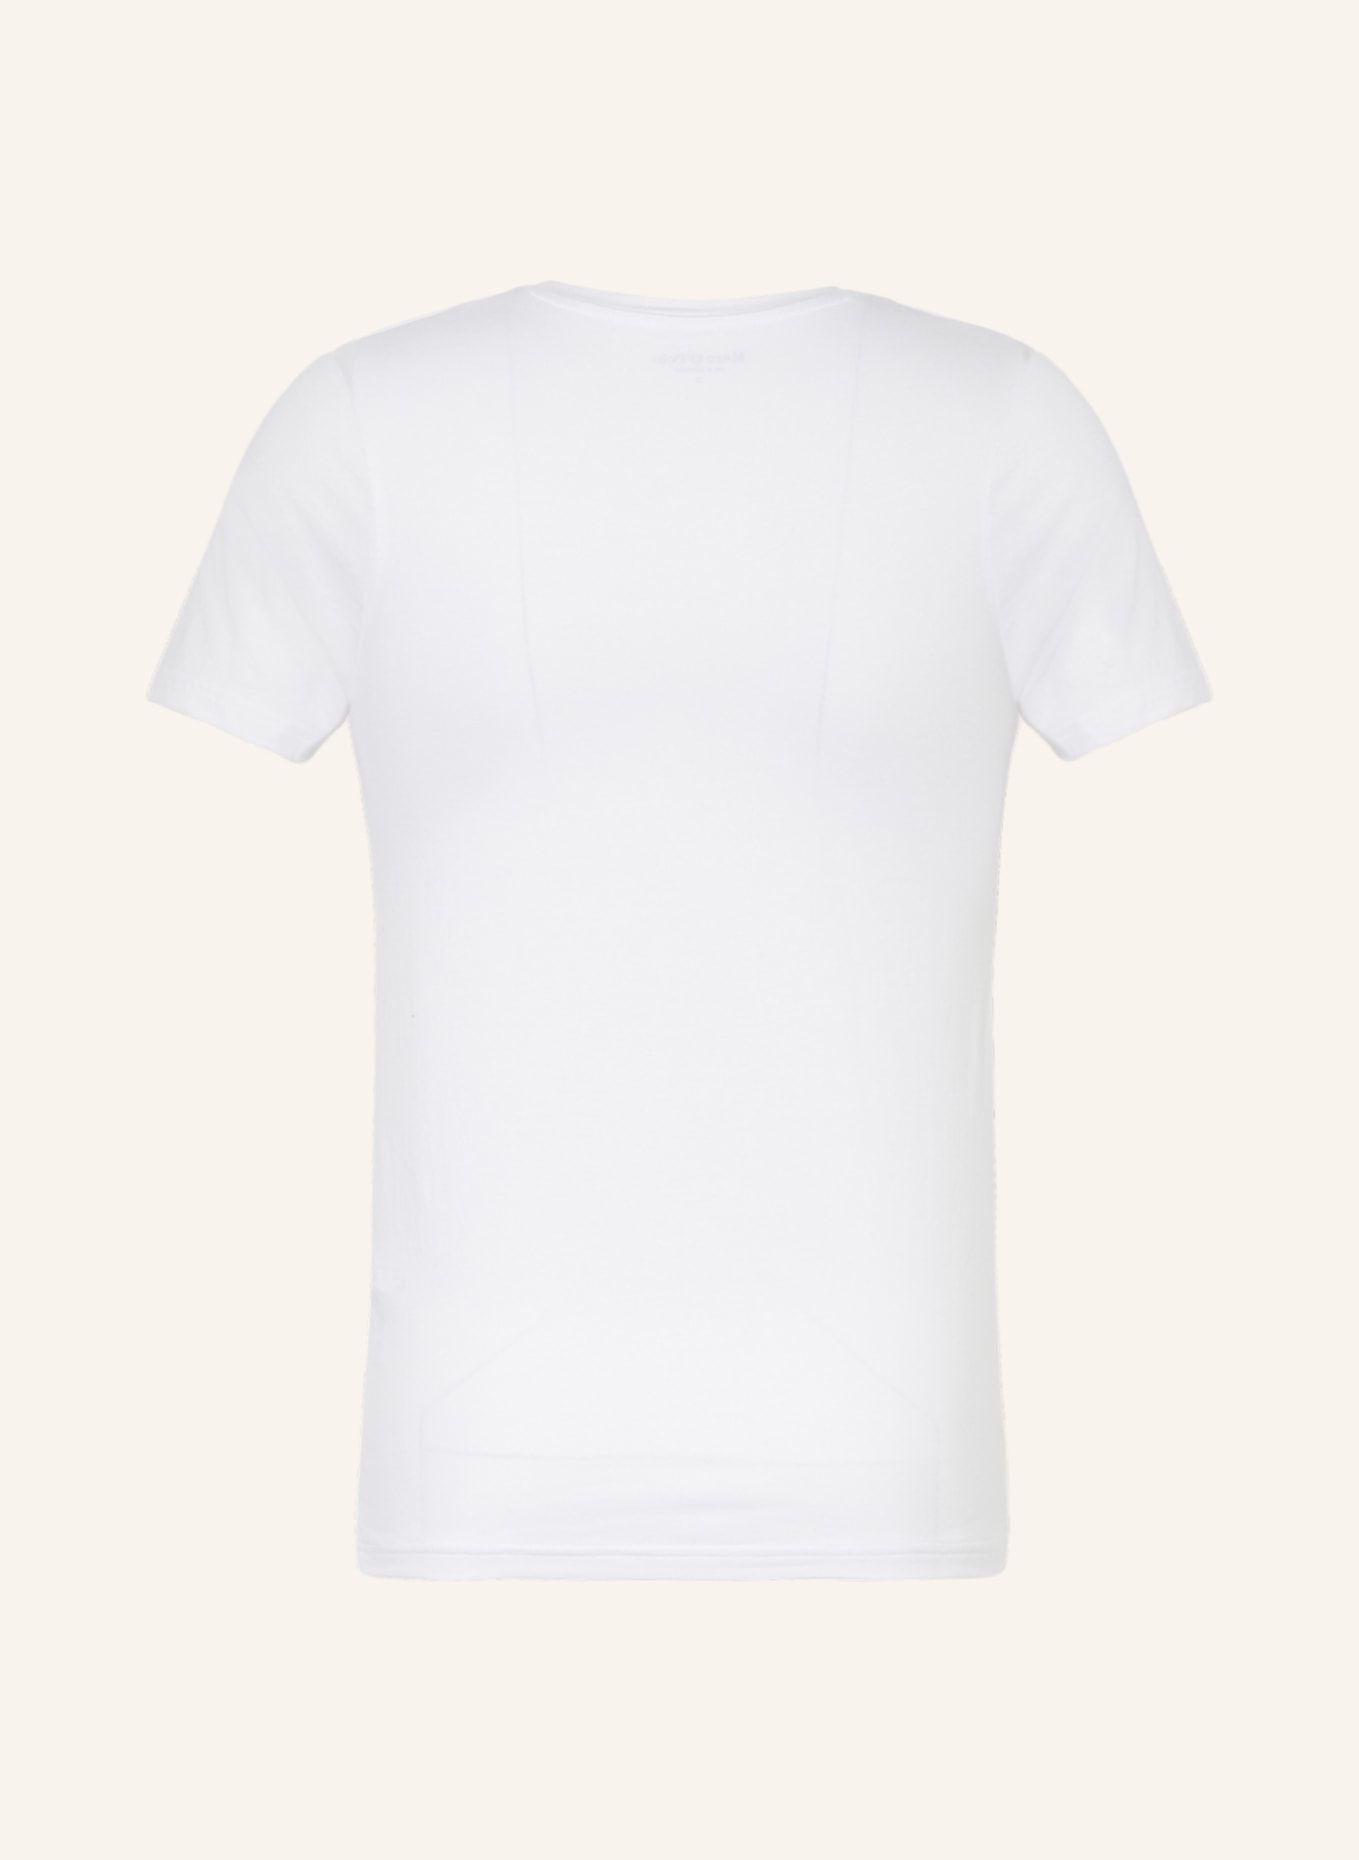 Marc O'Polo 2er-Pack T-Shirts, Farbe: WEISS (Bild 2)